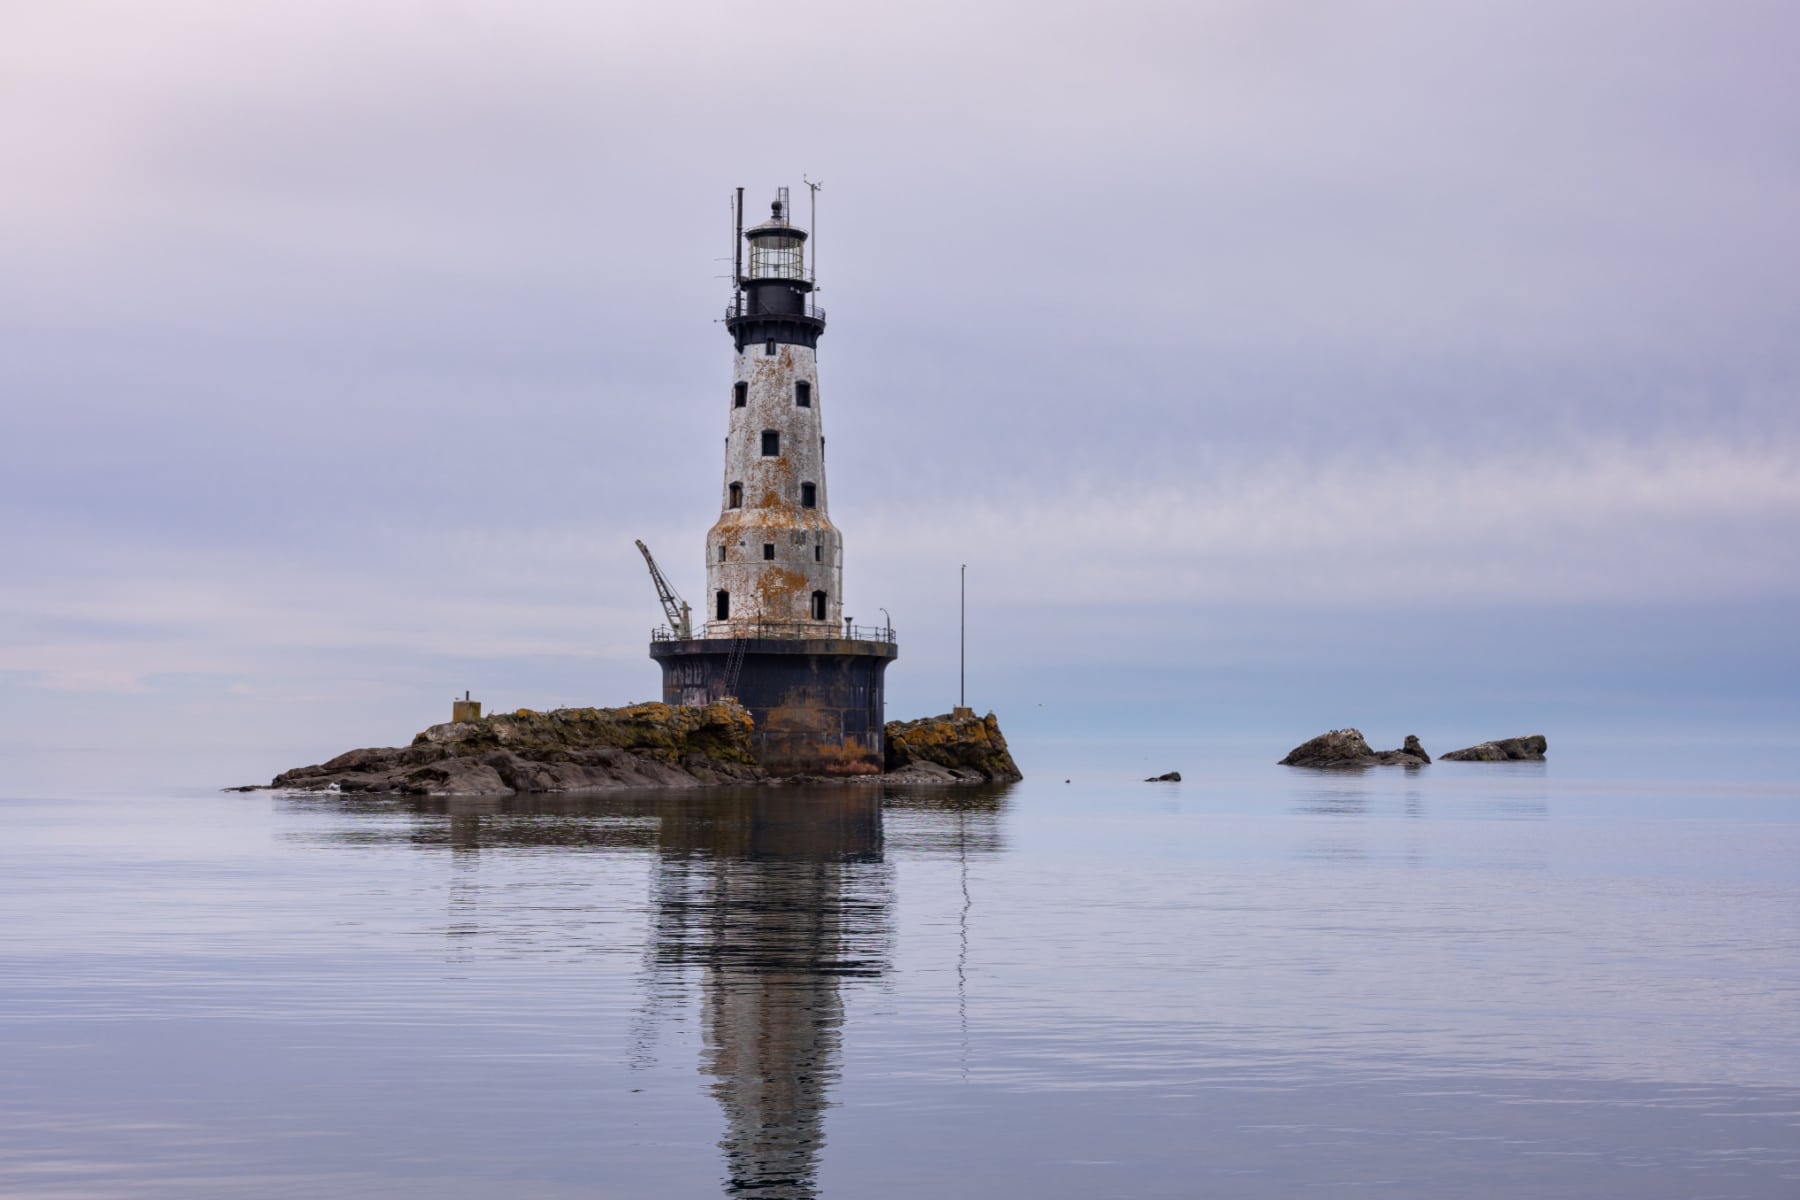 Rock of Ages Lighthouse at Isle Royale National Park sits on a stone bed in the middle of Lake Superior.